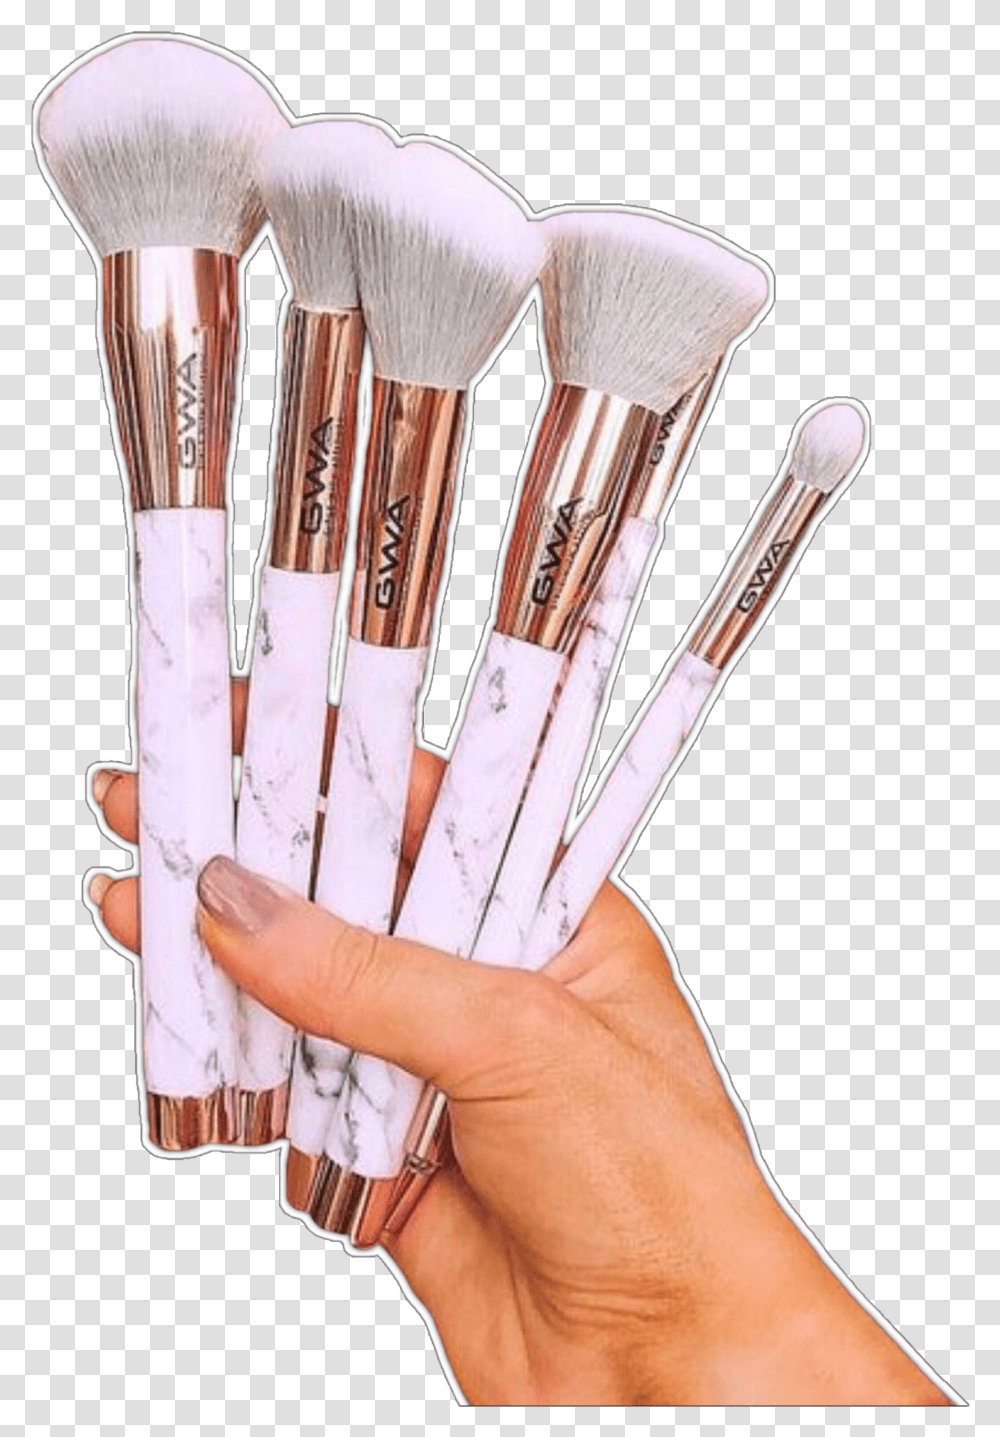 Pngs Makeup Brushes Nichememes Freetoedit Niche Self Care Memes Transparent Png